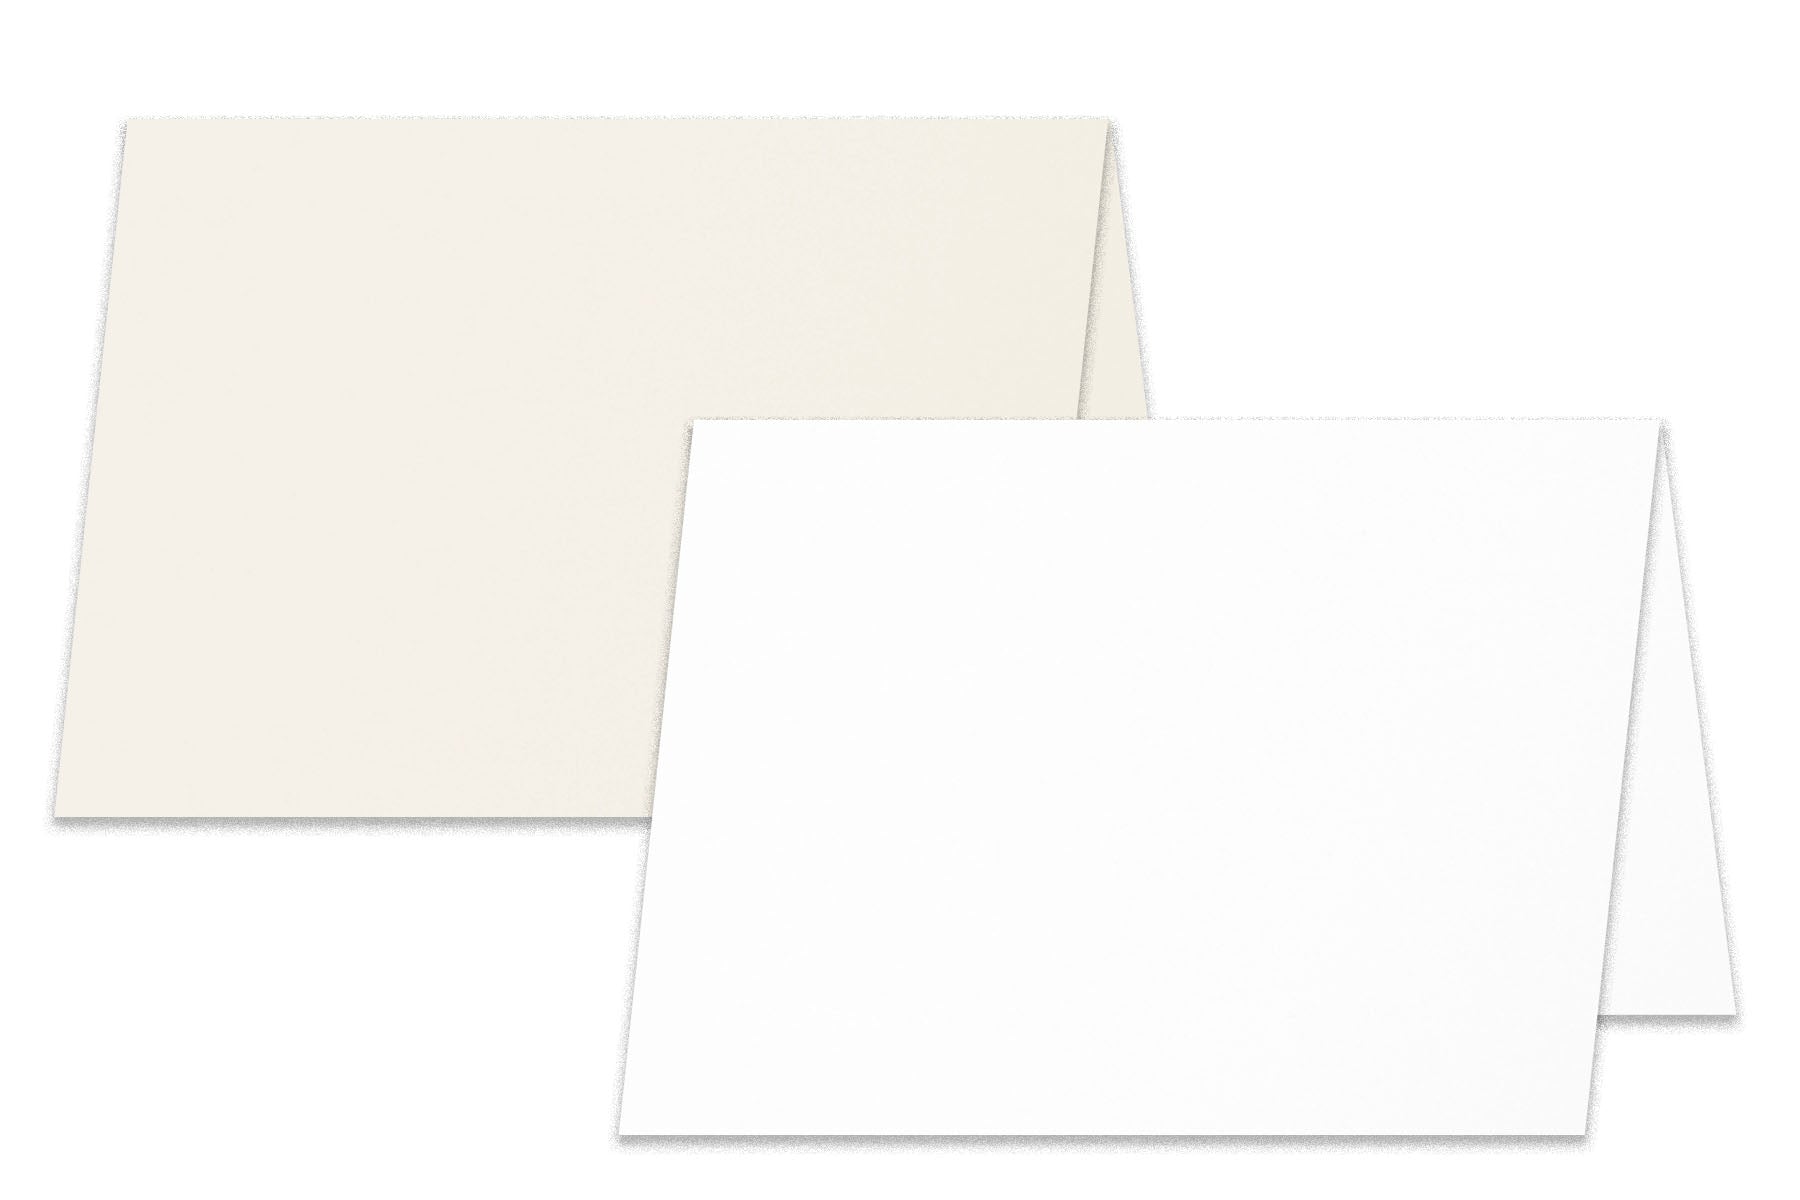 Jam Paper Printable Place Cards - 3 3/4 x 1 3/4 - Ivory - 12/Pack